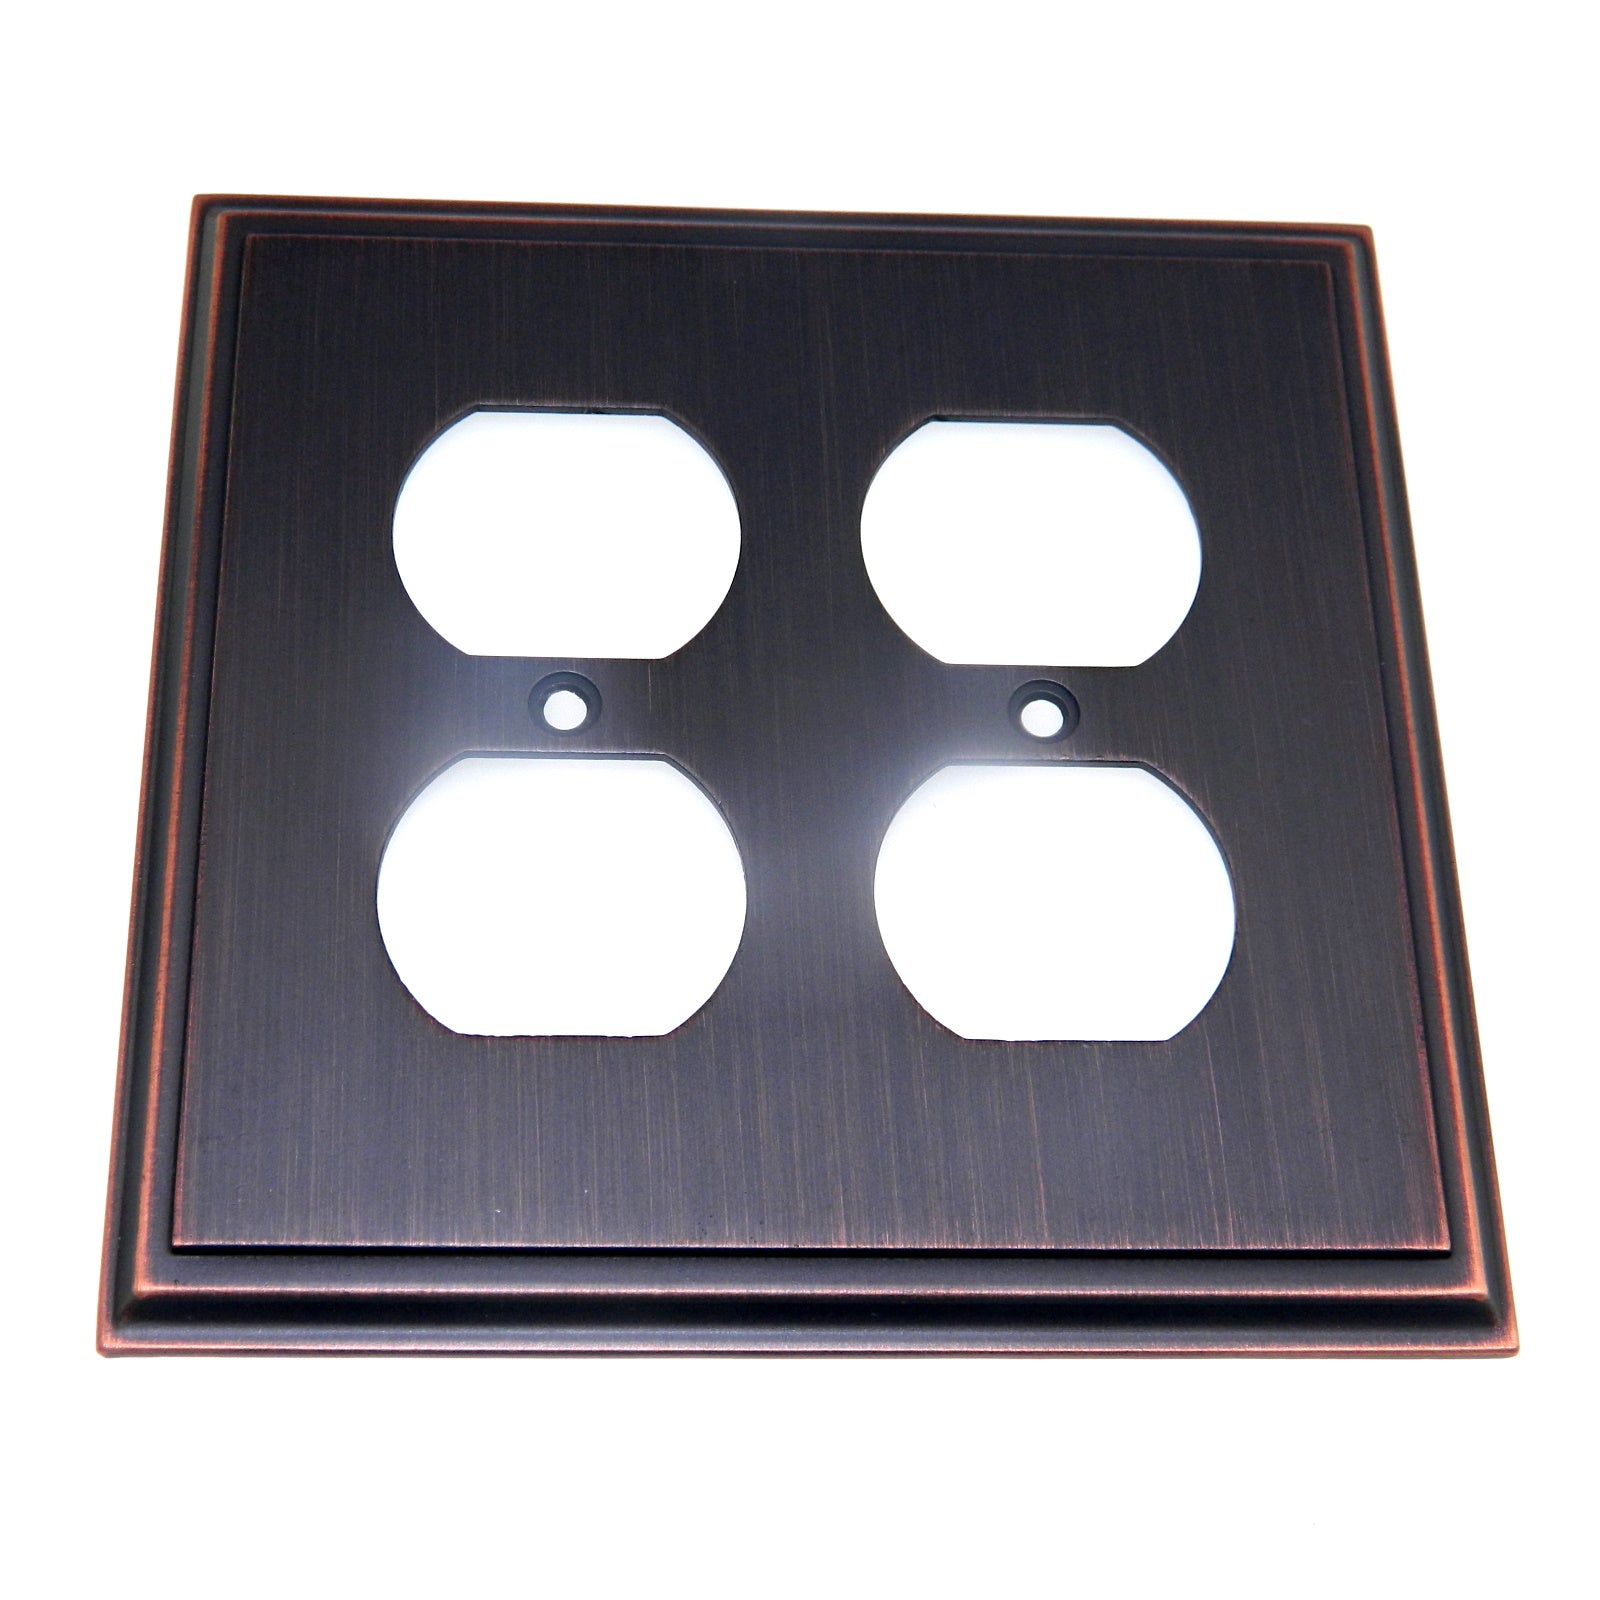 Amerock Mullholland Oil-Rubbed Bronze 4 Plug Outlet Wall Plate BP36523ORB